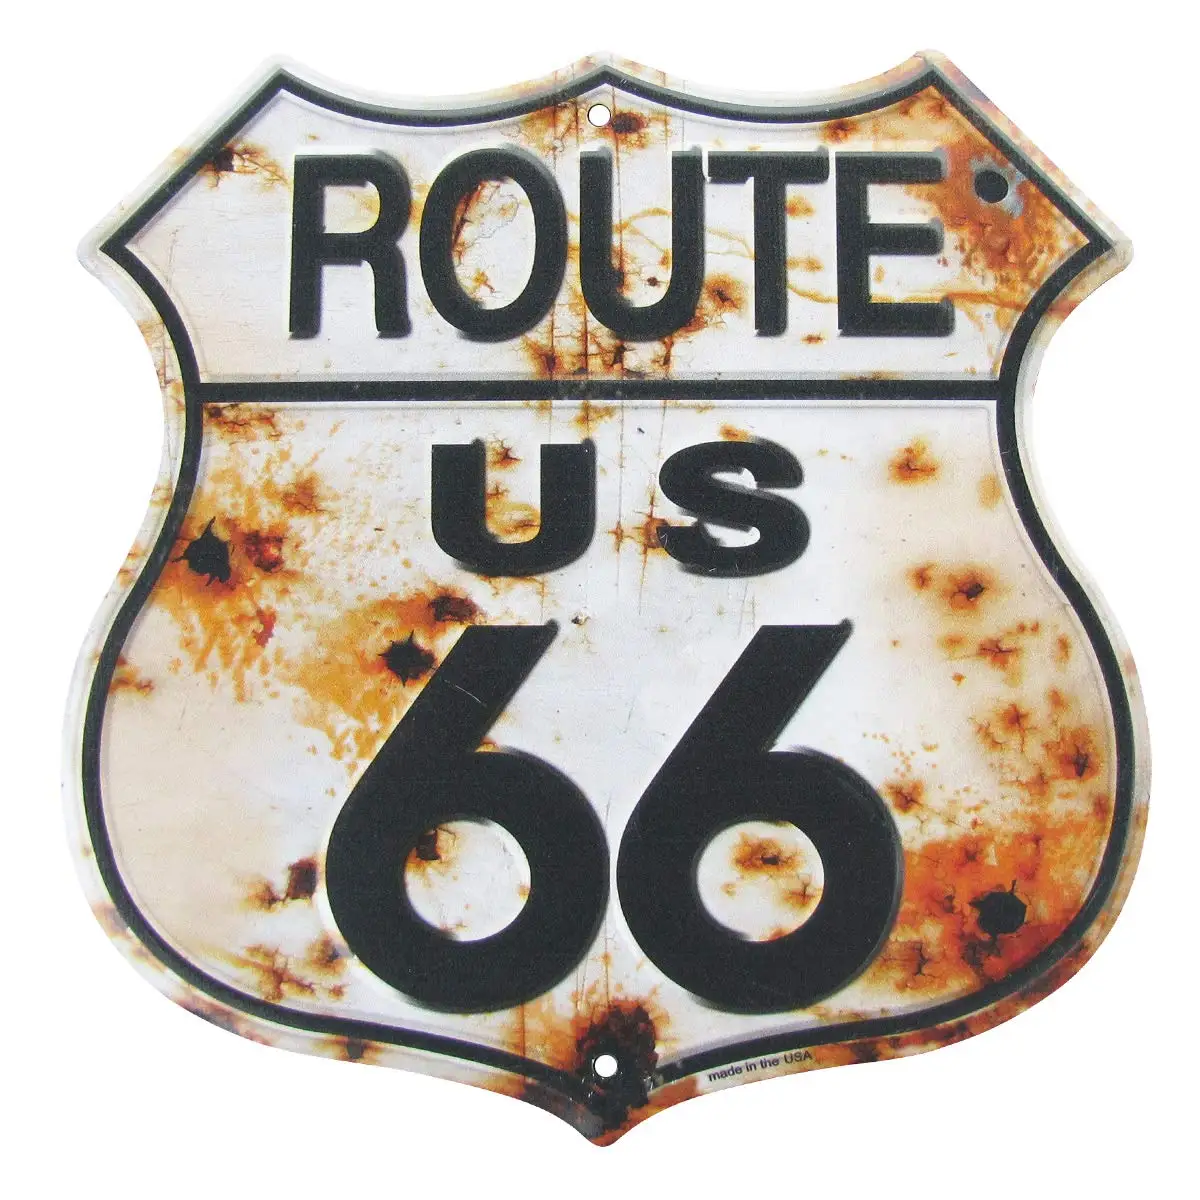 

Maizeco Wall Decor Tin Sign Retro Route 66 Hotrod Shield Bar Poster Coffee Garage Home Pub Beer 12 x 12 Inch Metal Signs